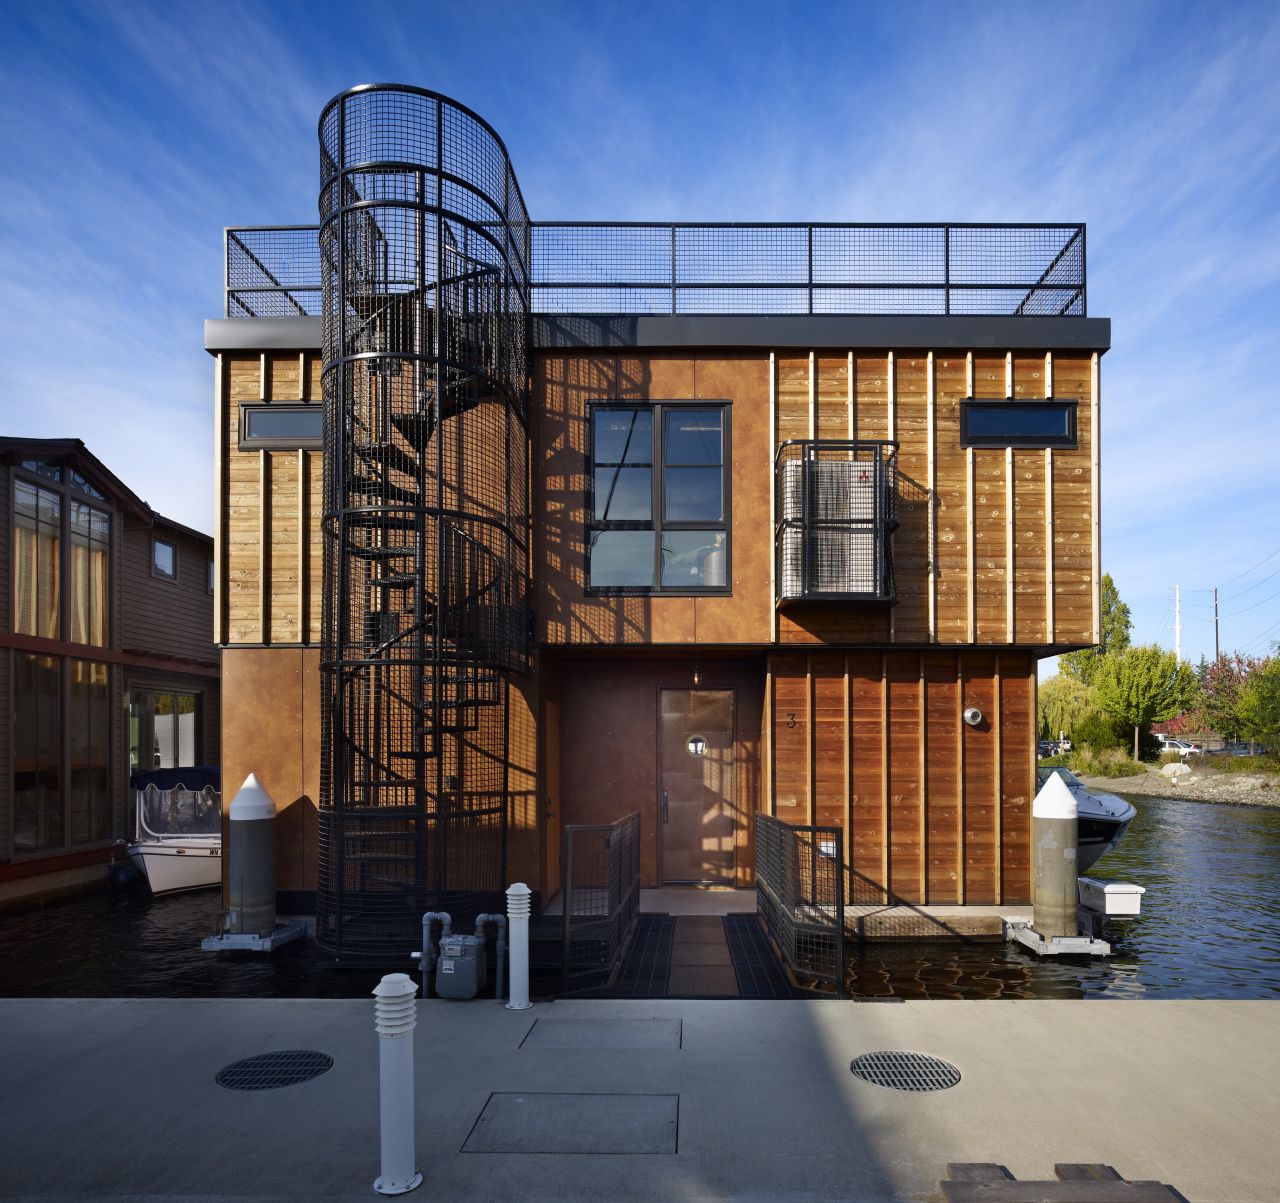 A project by Designs Northwest Architects, Lake Union Float Home is part of Seattle's unique houseboat community. Inspired by the century-old marina warehouses on the docks, the architects created a modern home with historical touches, evident in the industrial form, steel beams, polished concrete and caged spiral staircase.